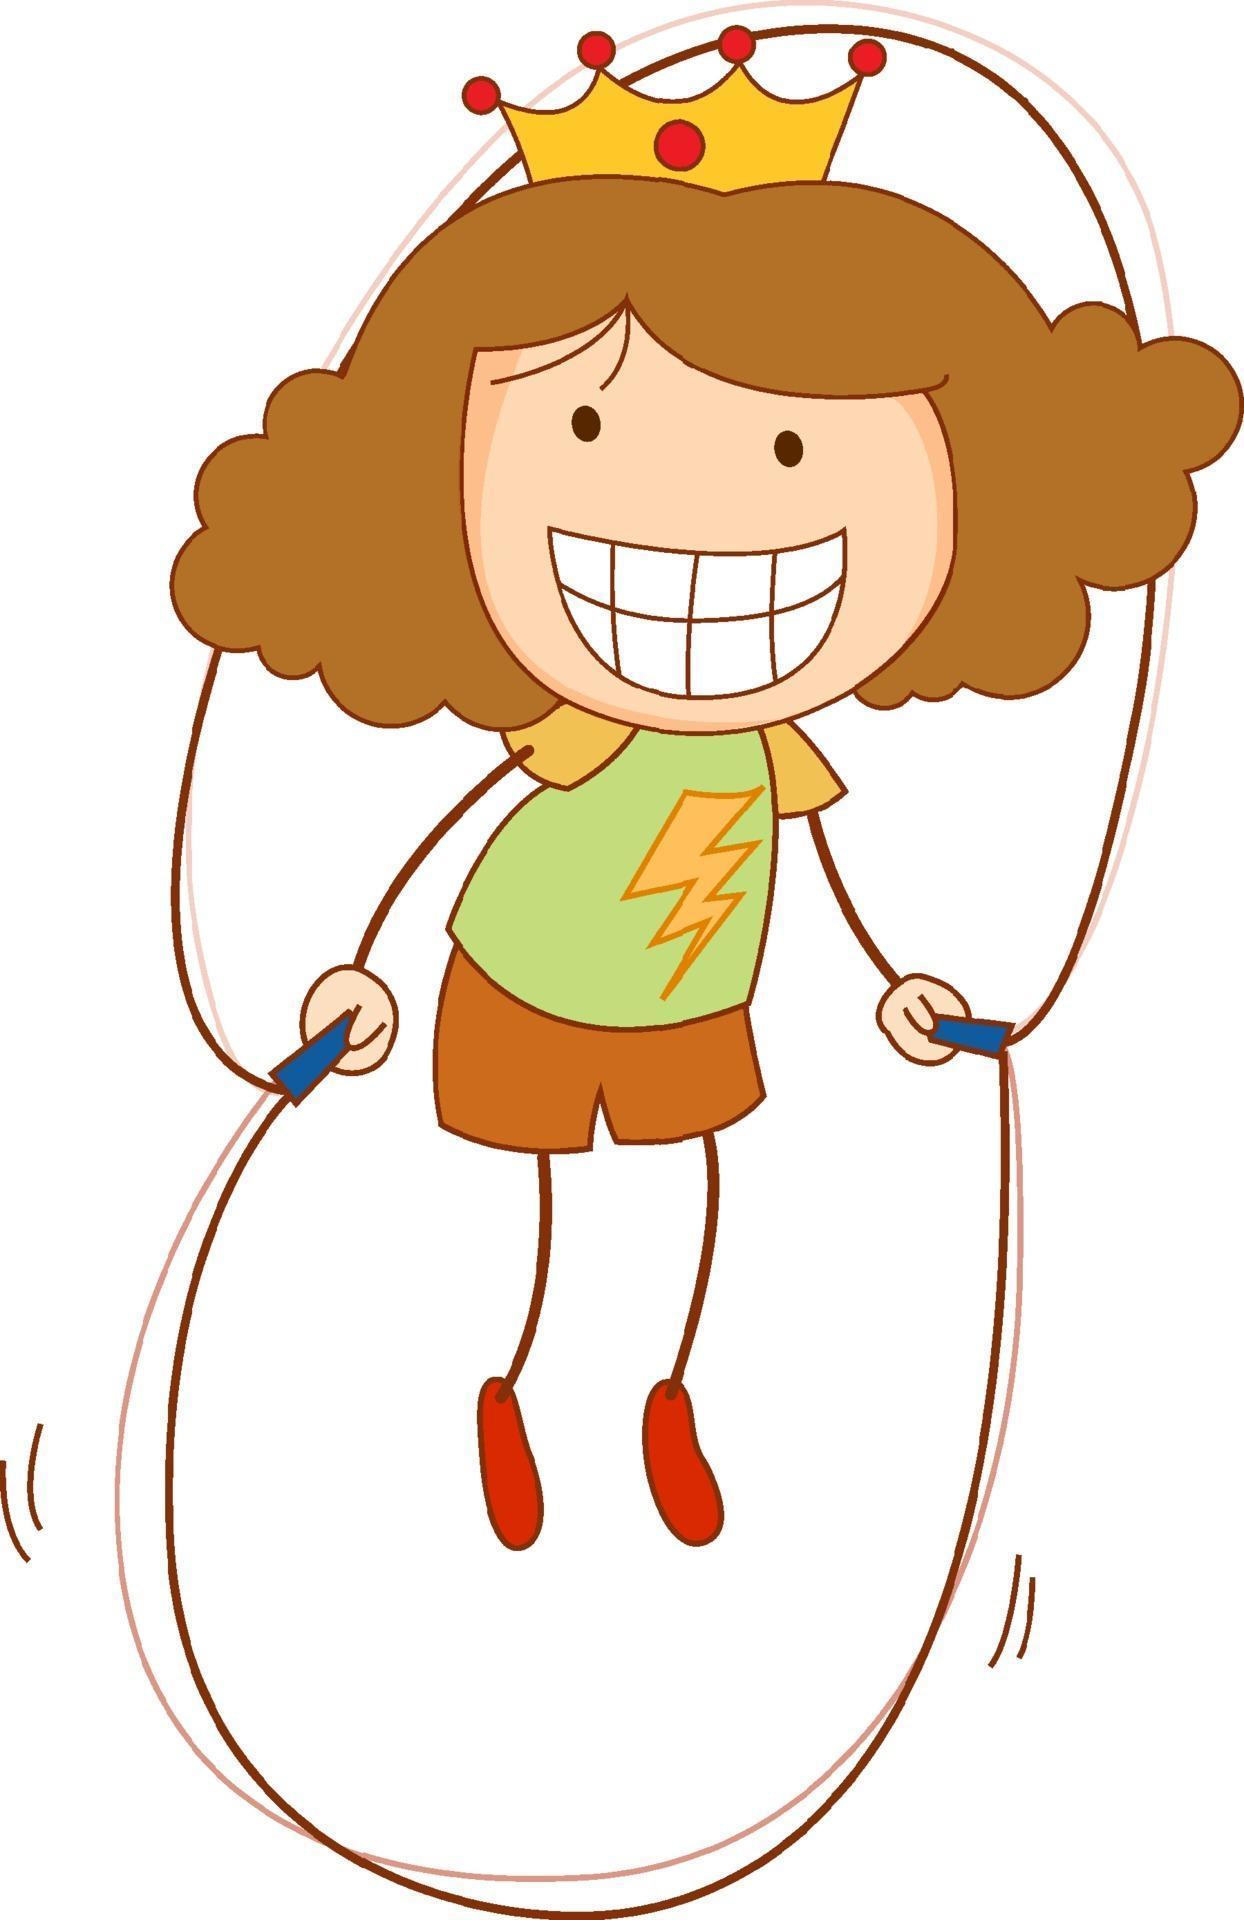 A doodle kid jumping rope cartoon character isolated 2037360 Vector Art